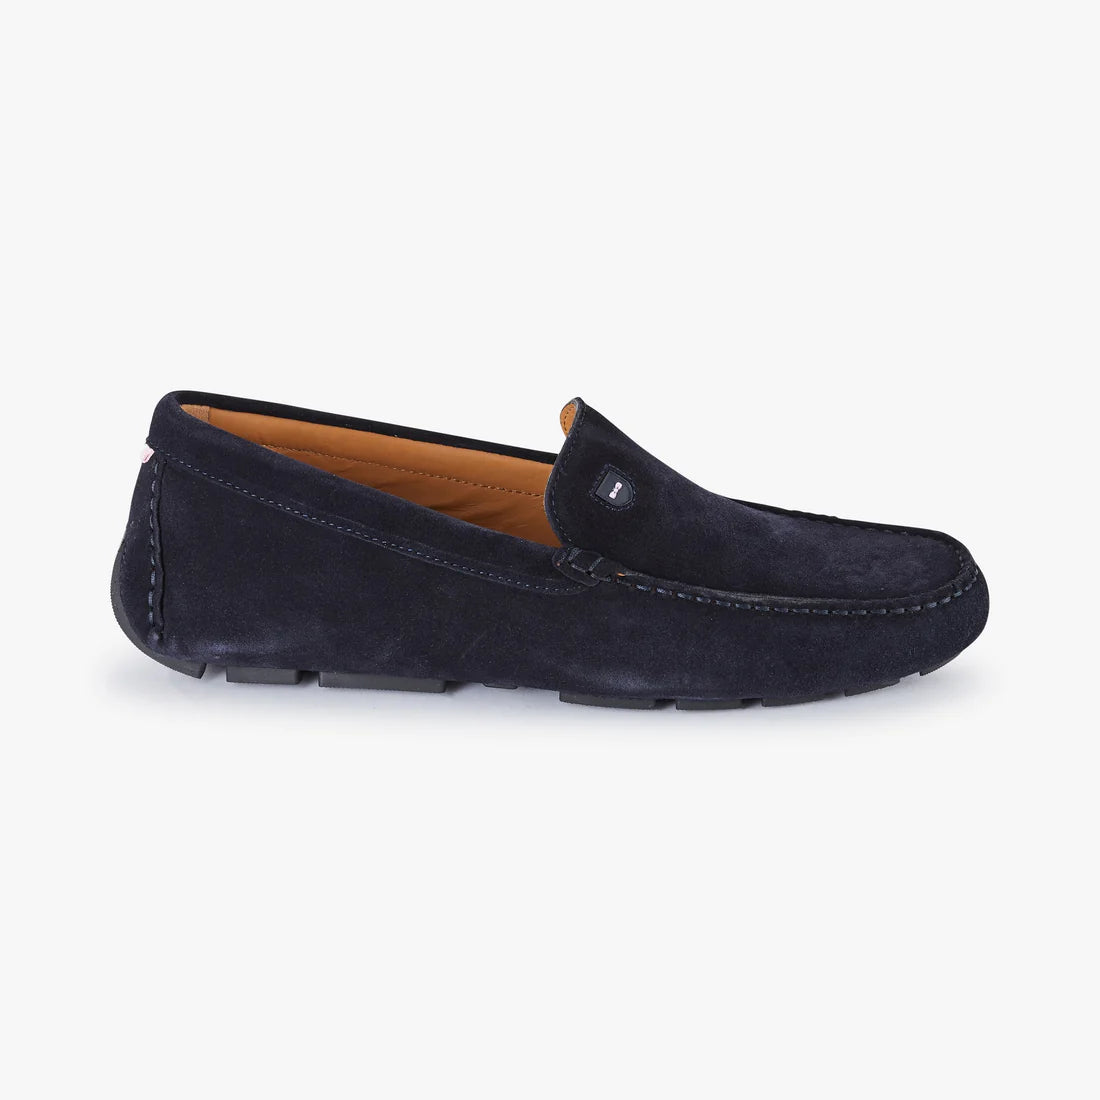 Driving shoe in navy by Eden Park